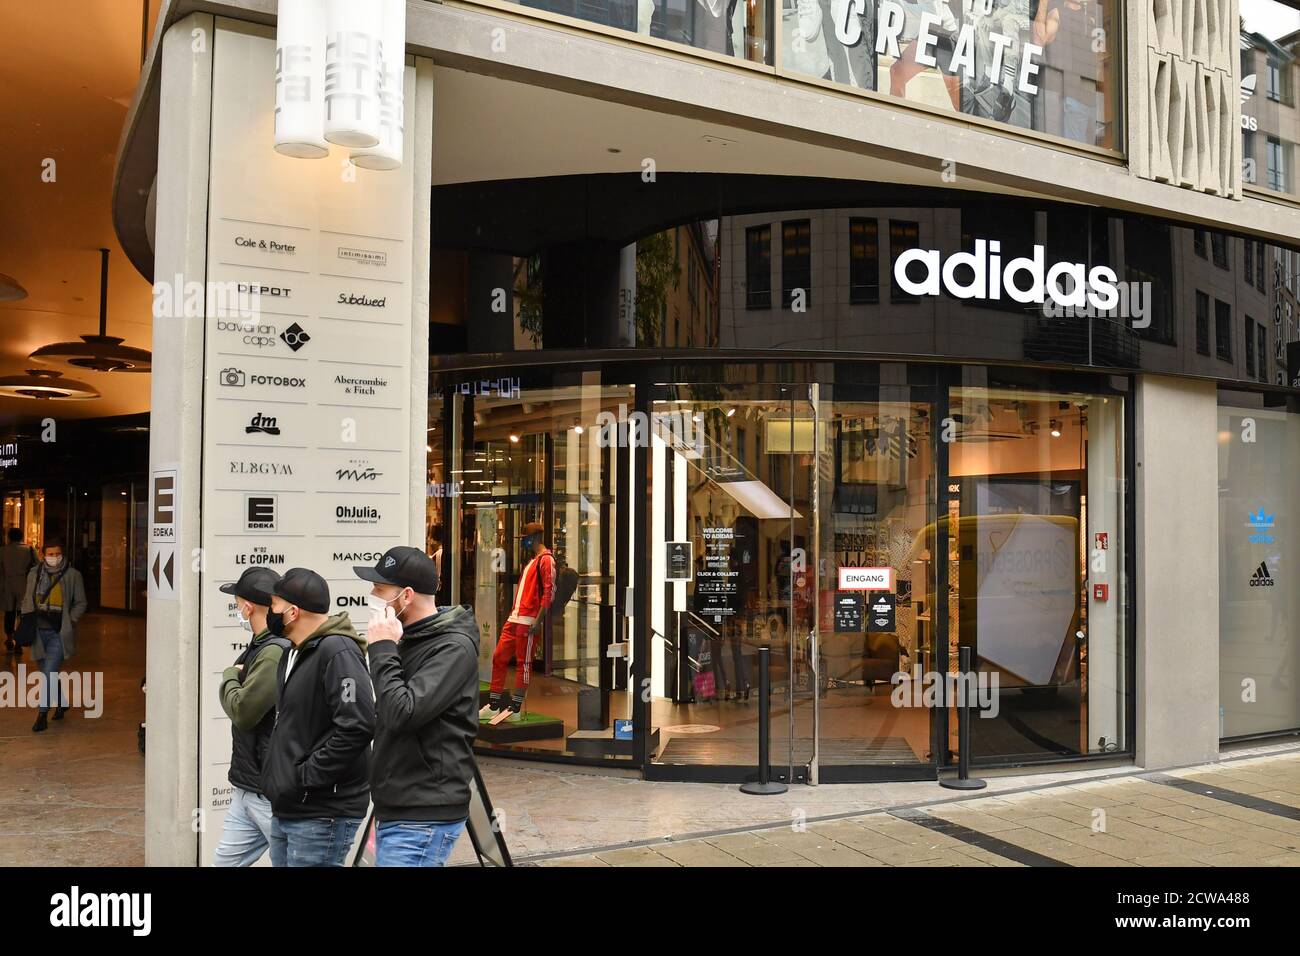 Adidas Store Exterior High Resolution Stock Photography and Images - Alamy